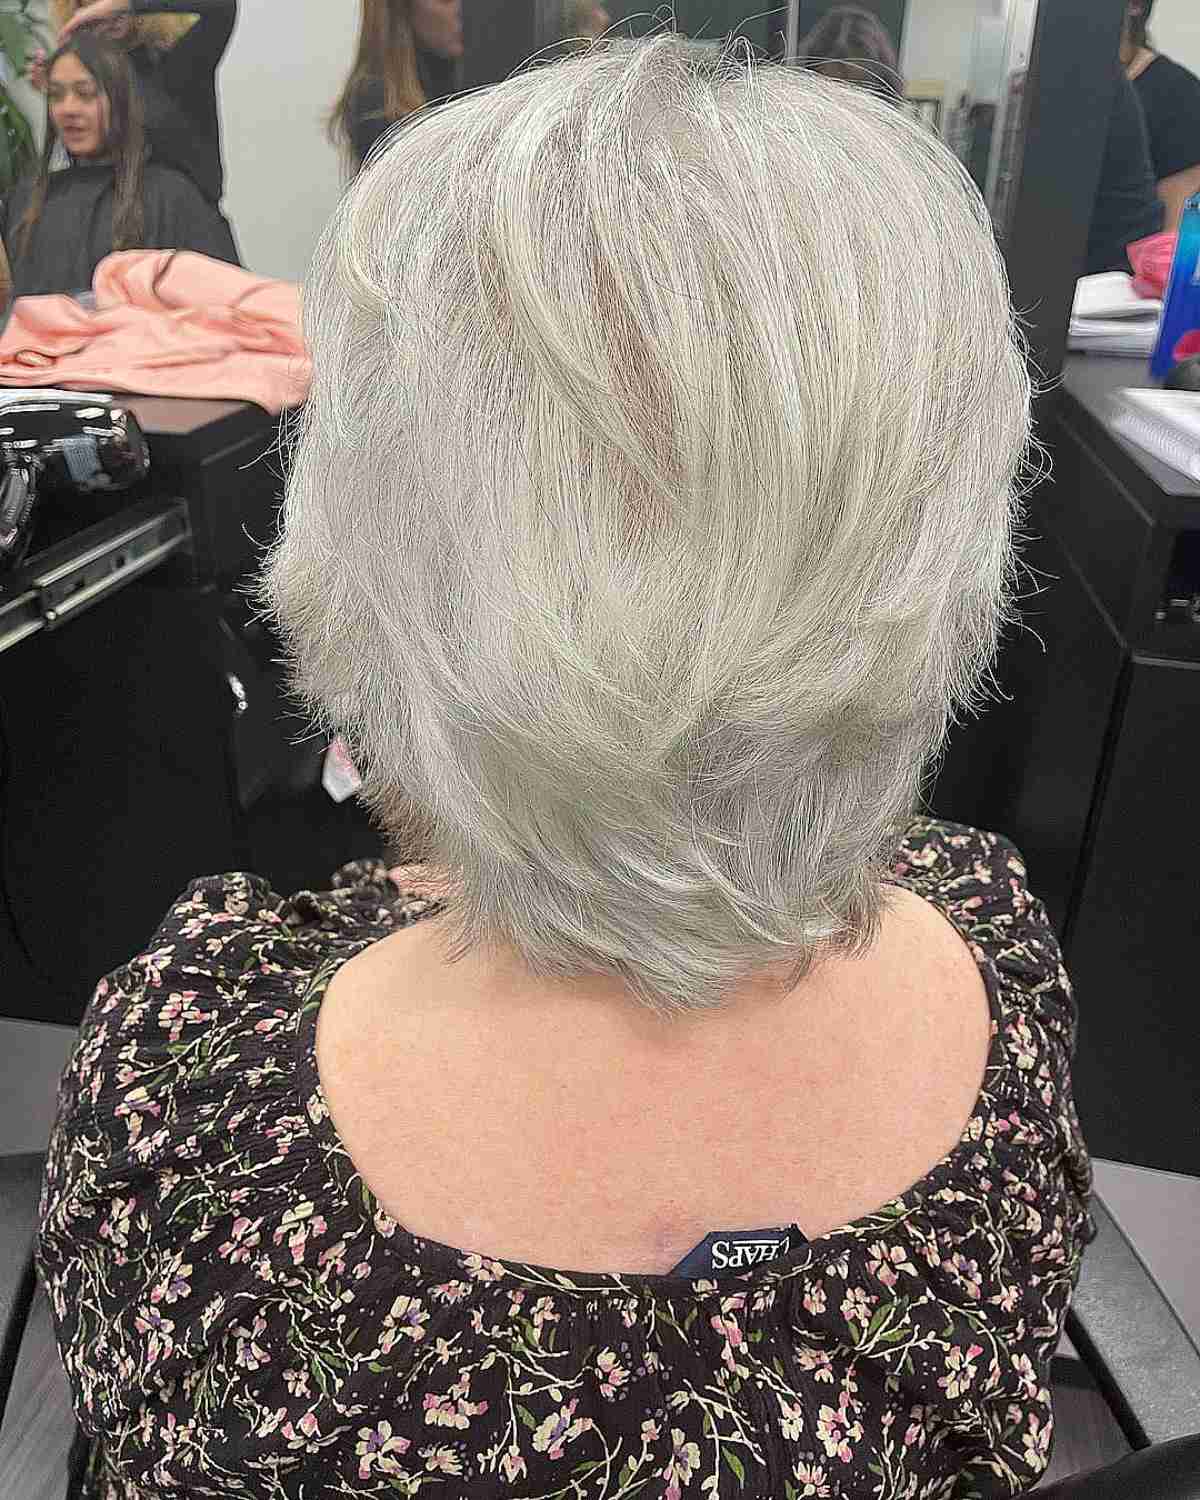 Shaggy Grey Pixie Hair with Feathery Layers for Ladies Over Seventy